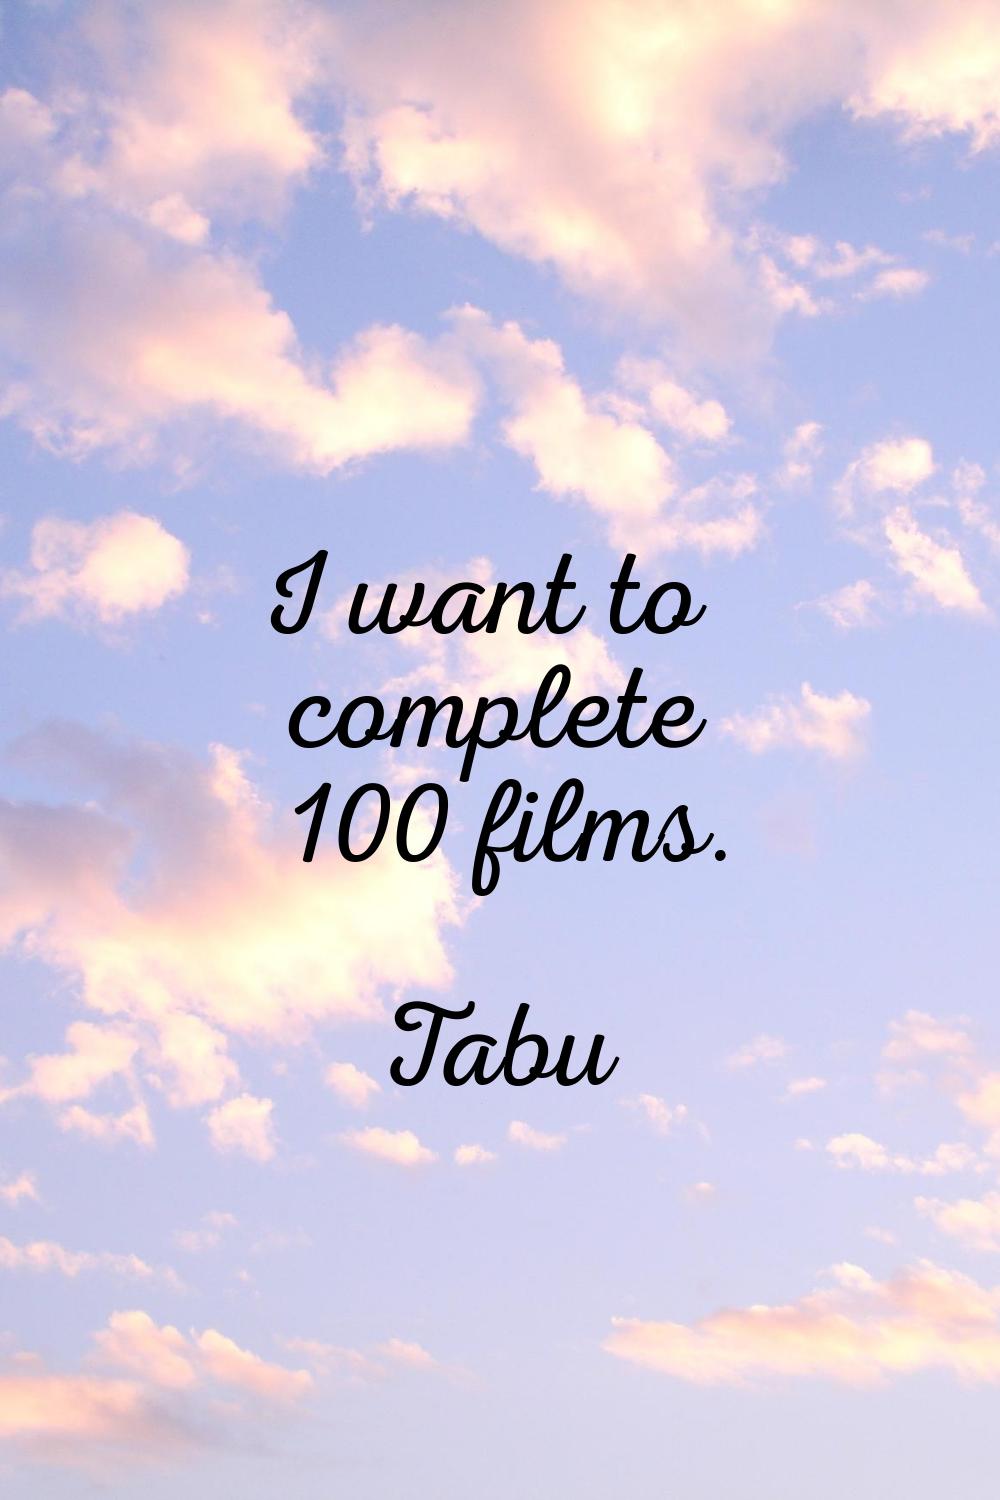 I want to complete 100 films.